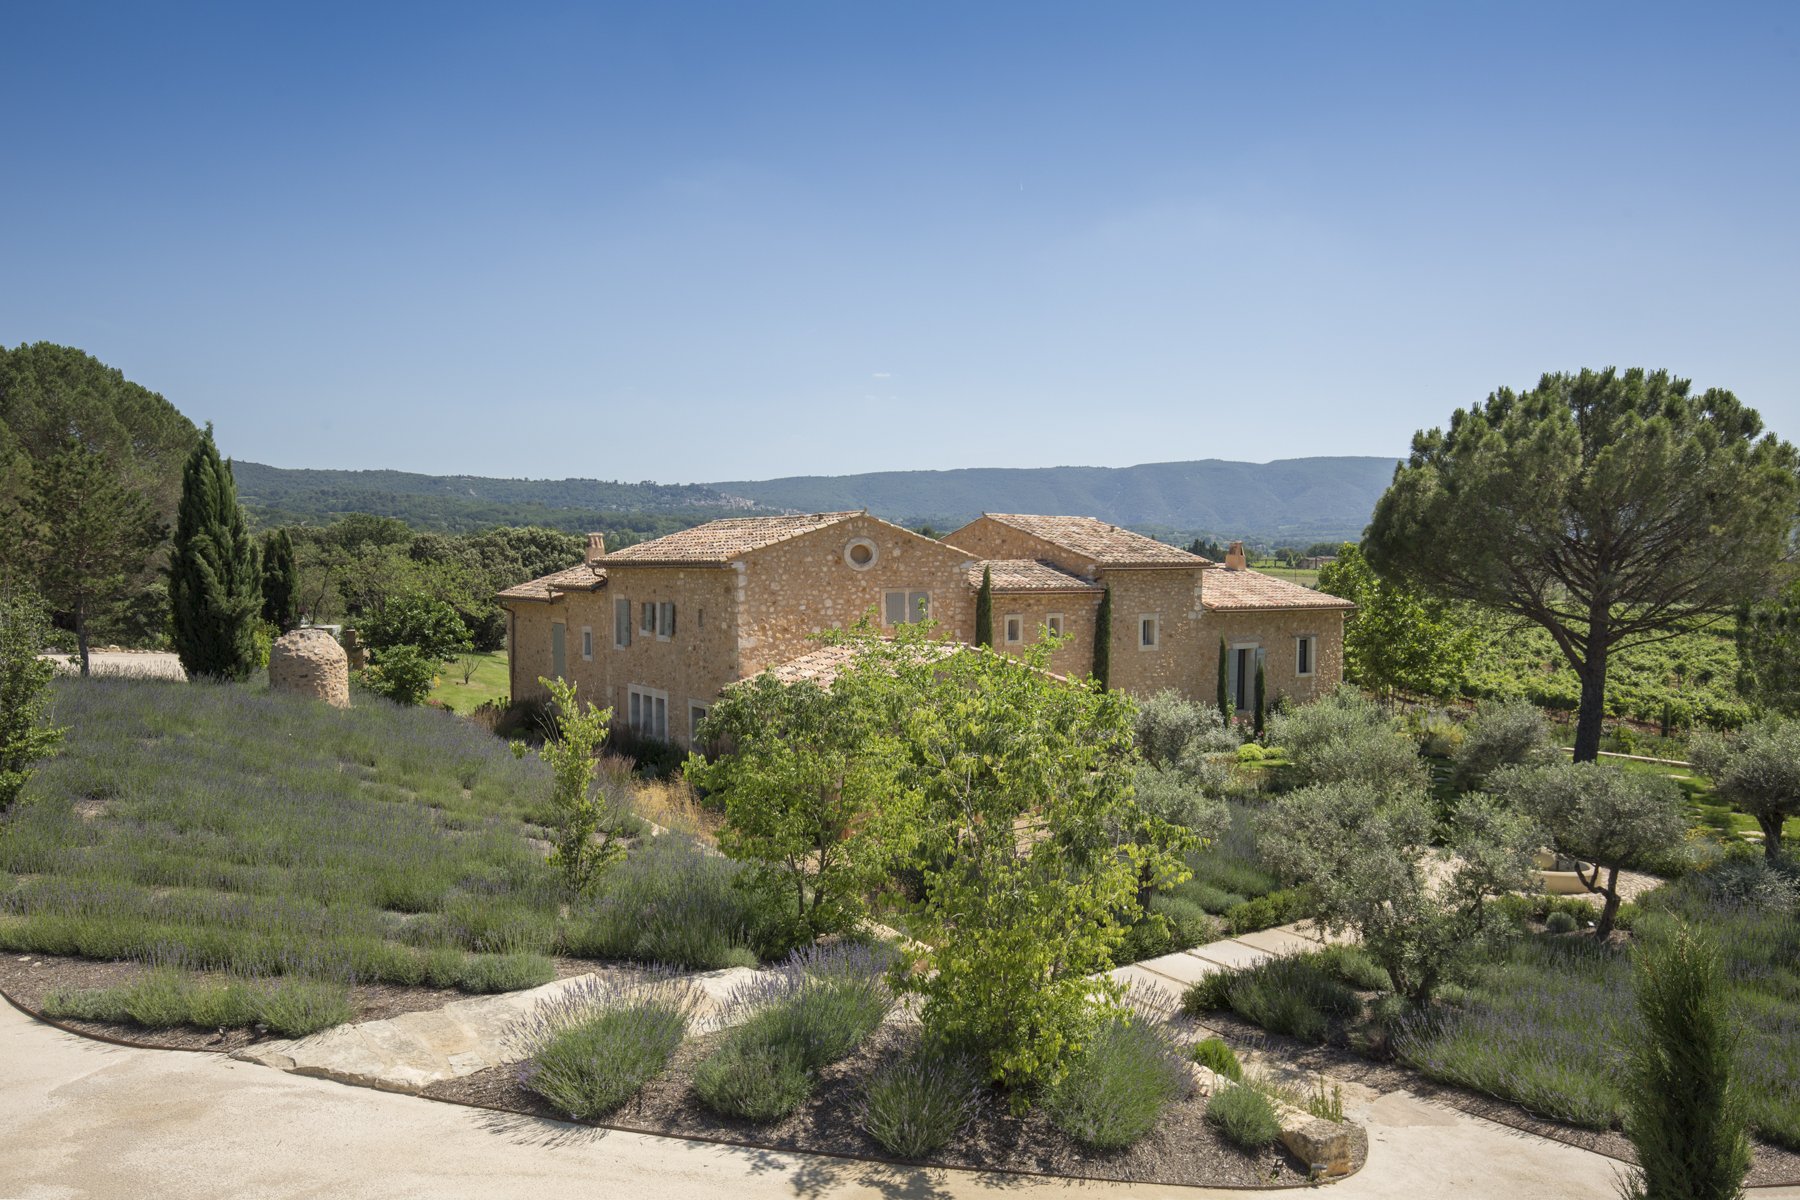 Francis+York+ Exquisitely Renovated Provencal Mas in Bonnieux, Luberon 00020.jpg